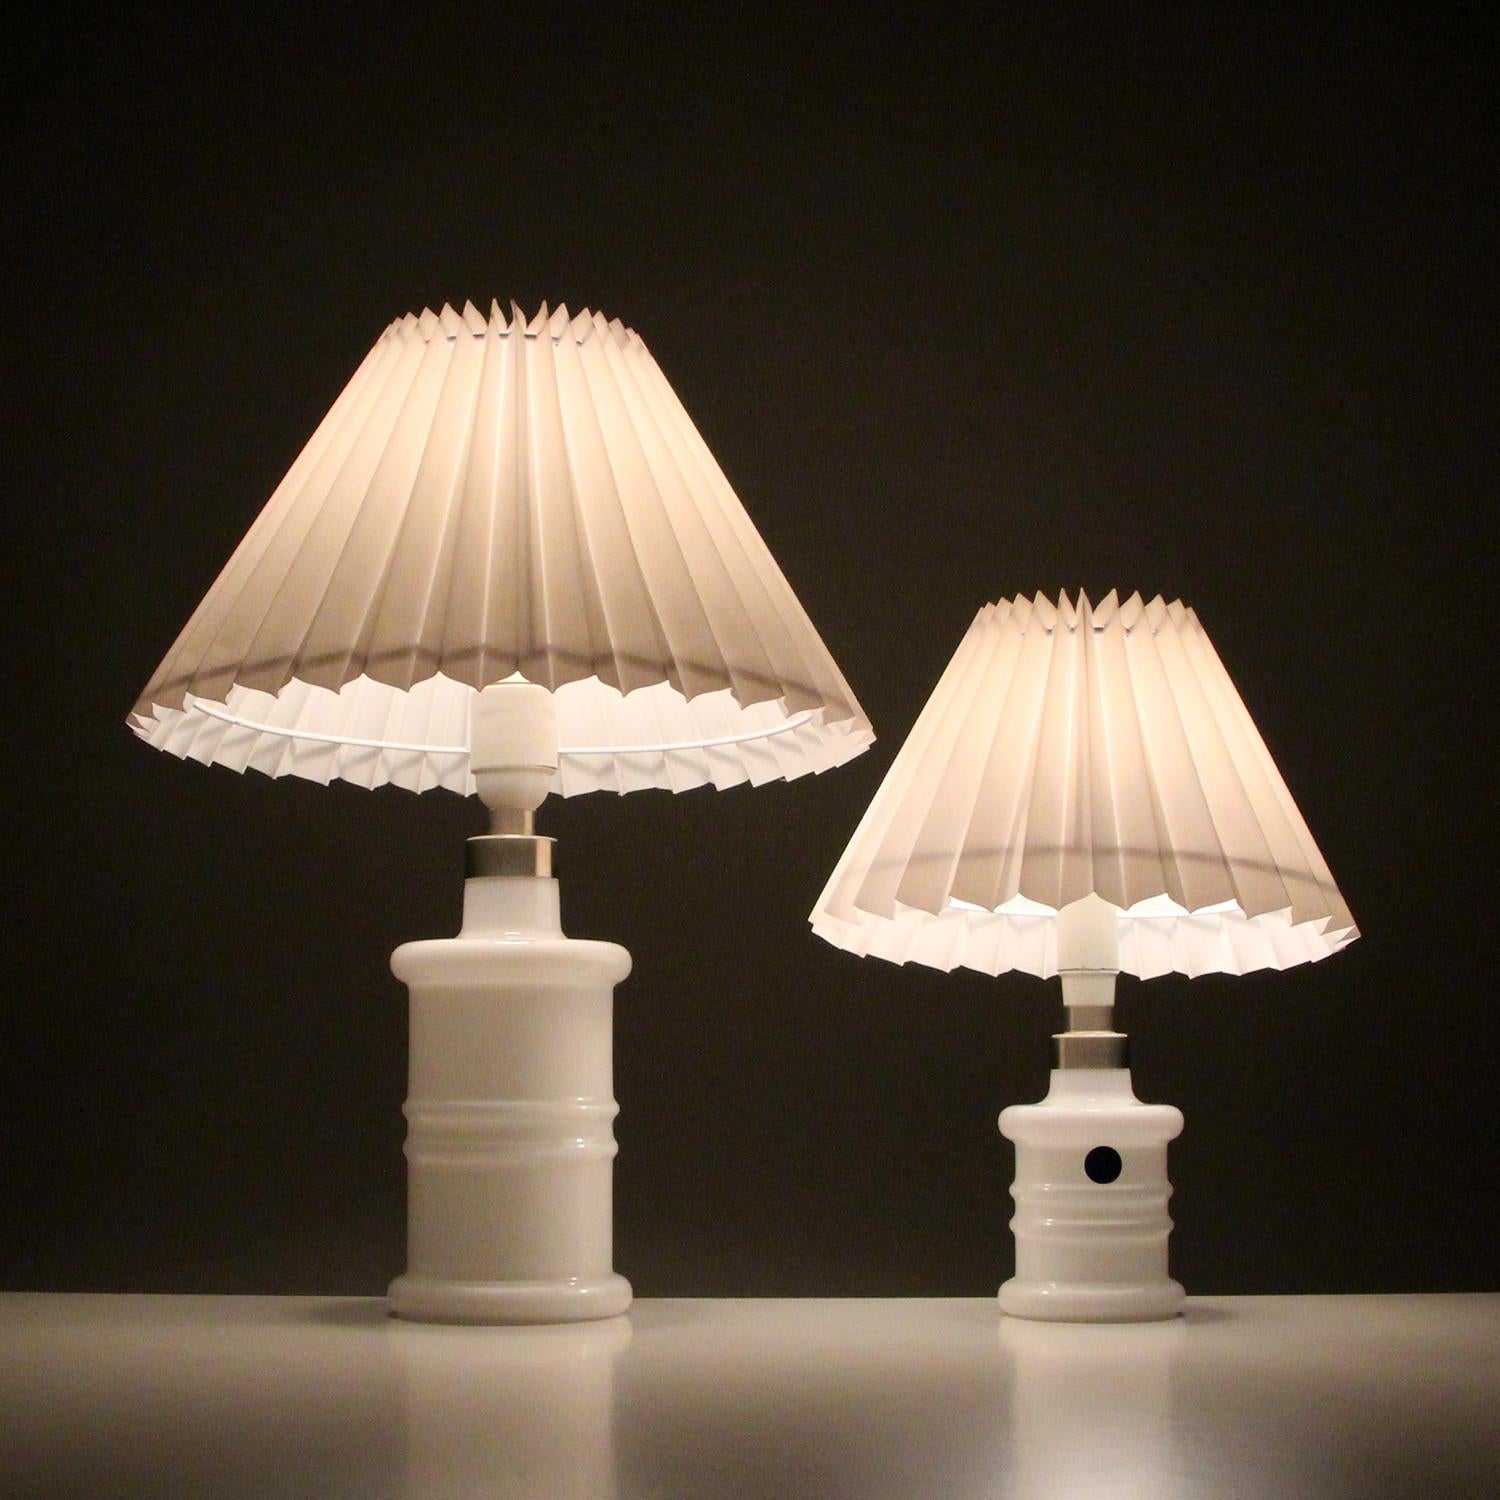 Danish Apoteker Table Lamps 'Set' by Sidse Werner for Holmegaard, 1981, New Shades Incl